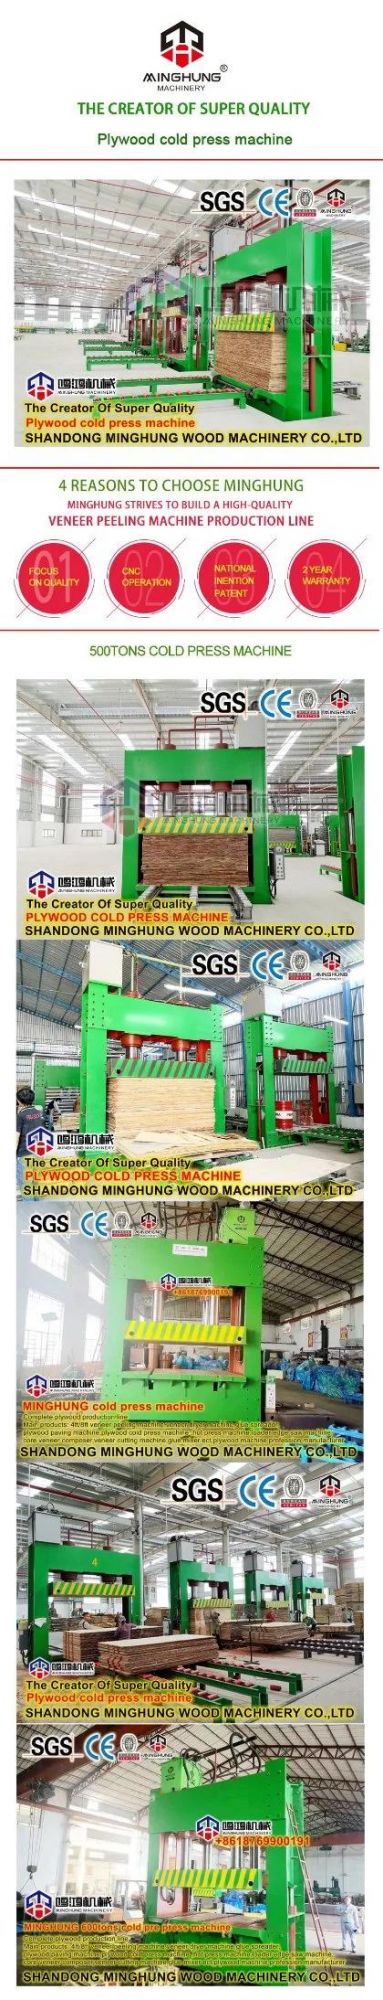 5005 Cold Press Plywood Machine for Pre Pressing Plywood